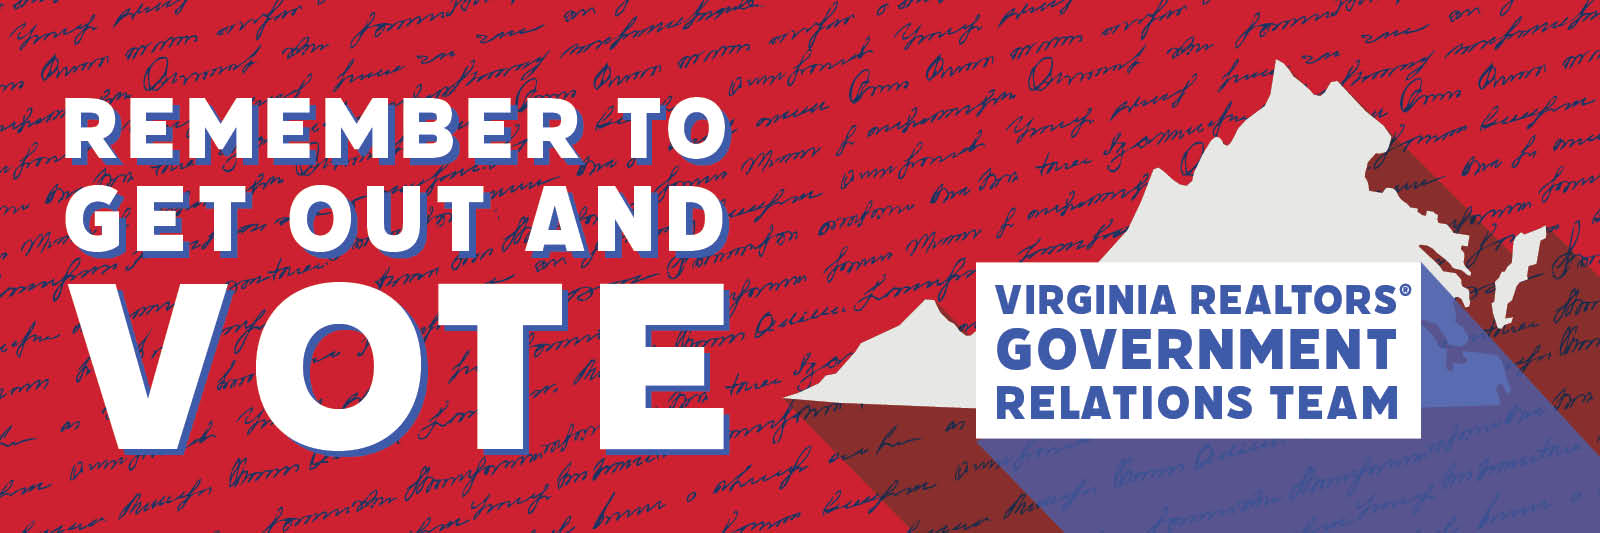 Get Out and Vote in the June 20th Primary Elections Virginia REALTORS®